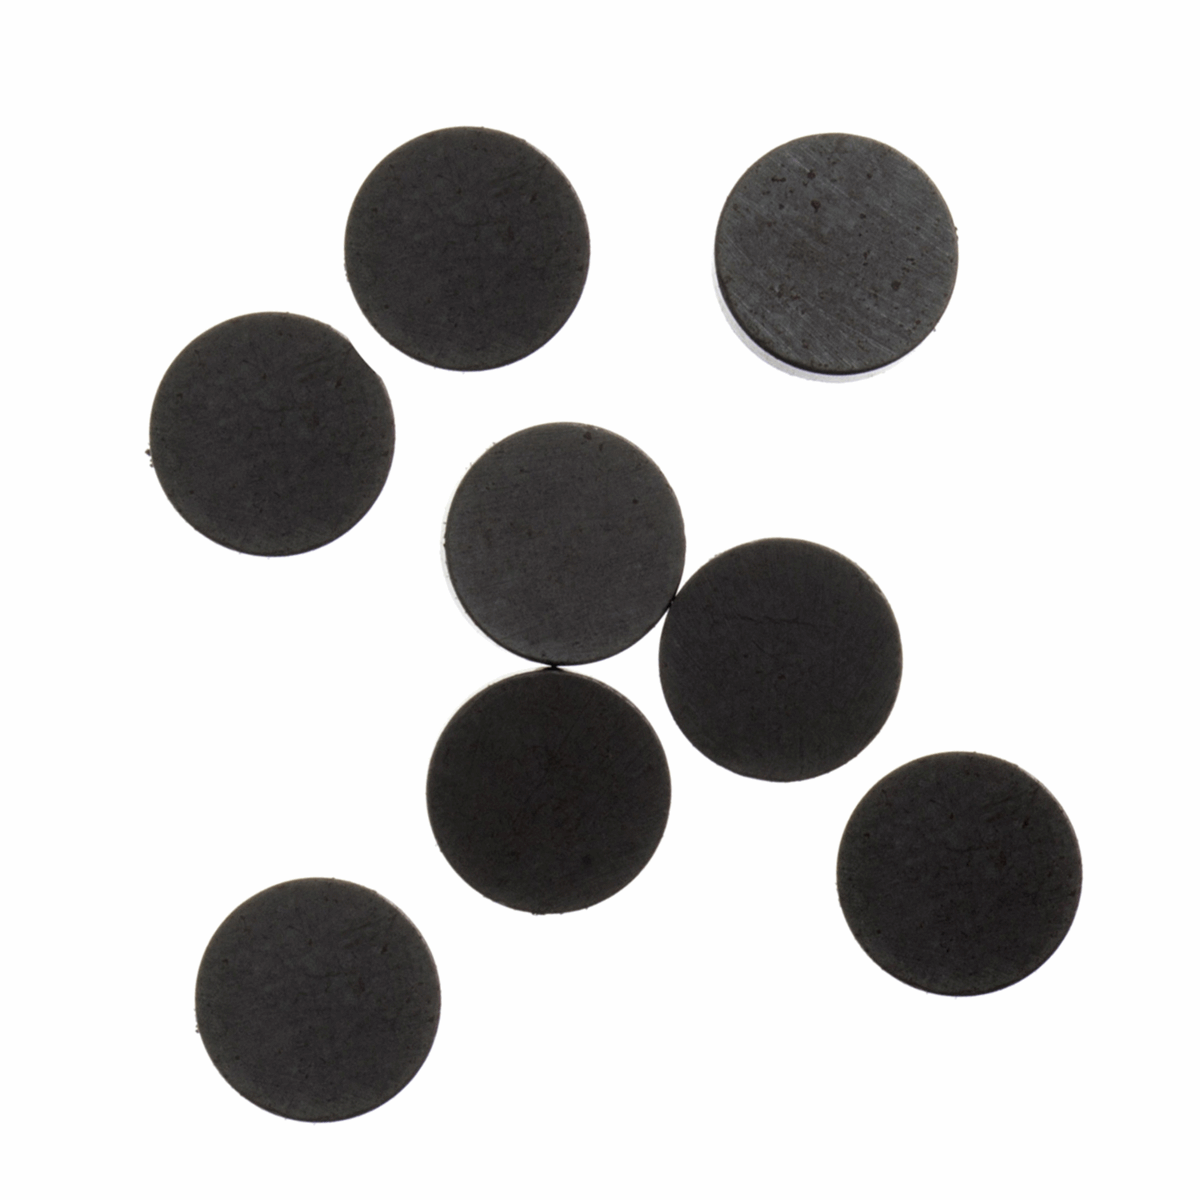 Magnets Round 10mm Pack size 10 by Impex